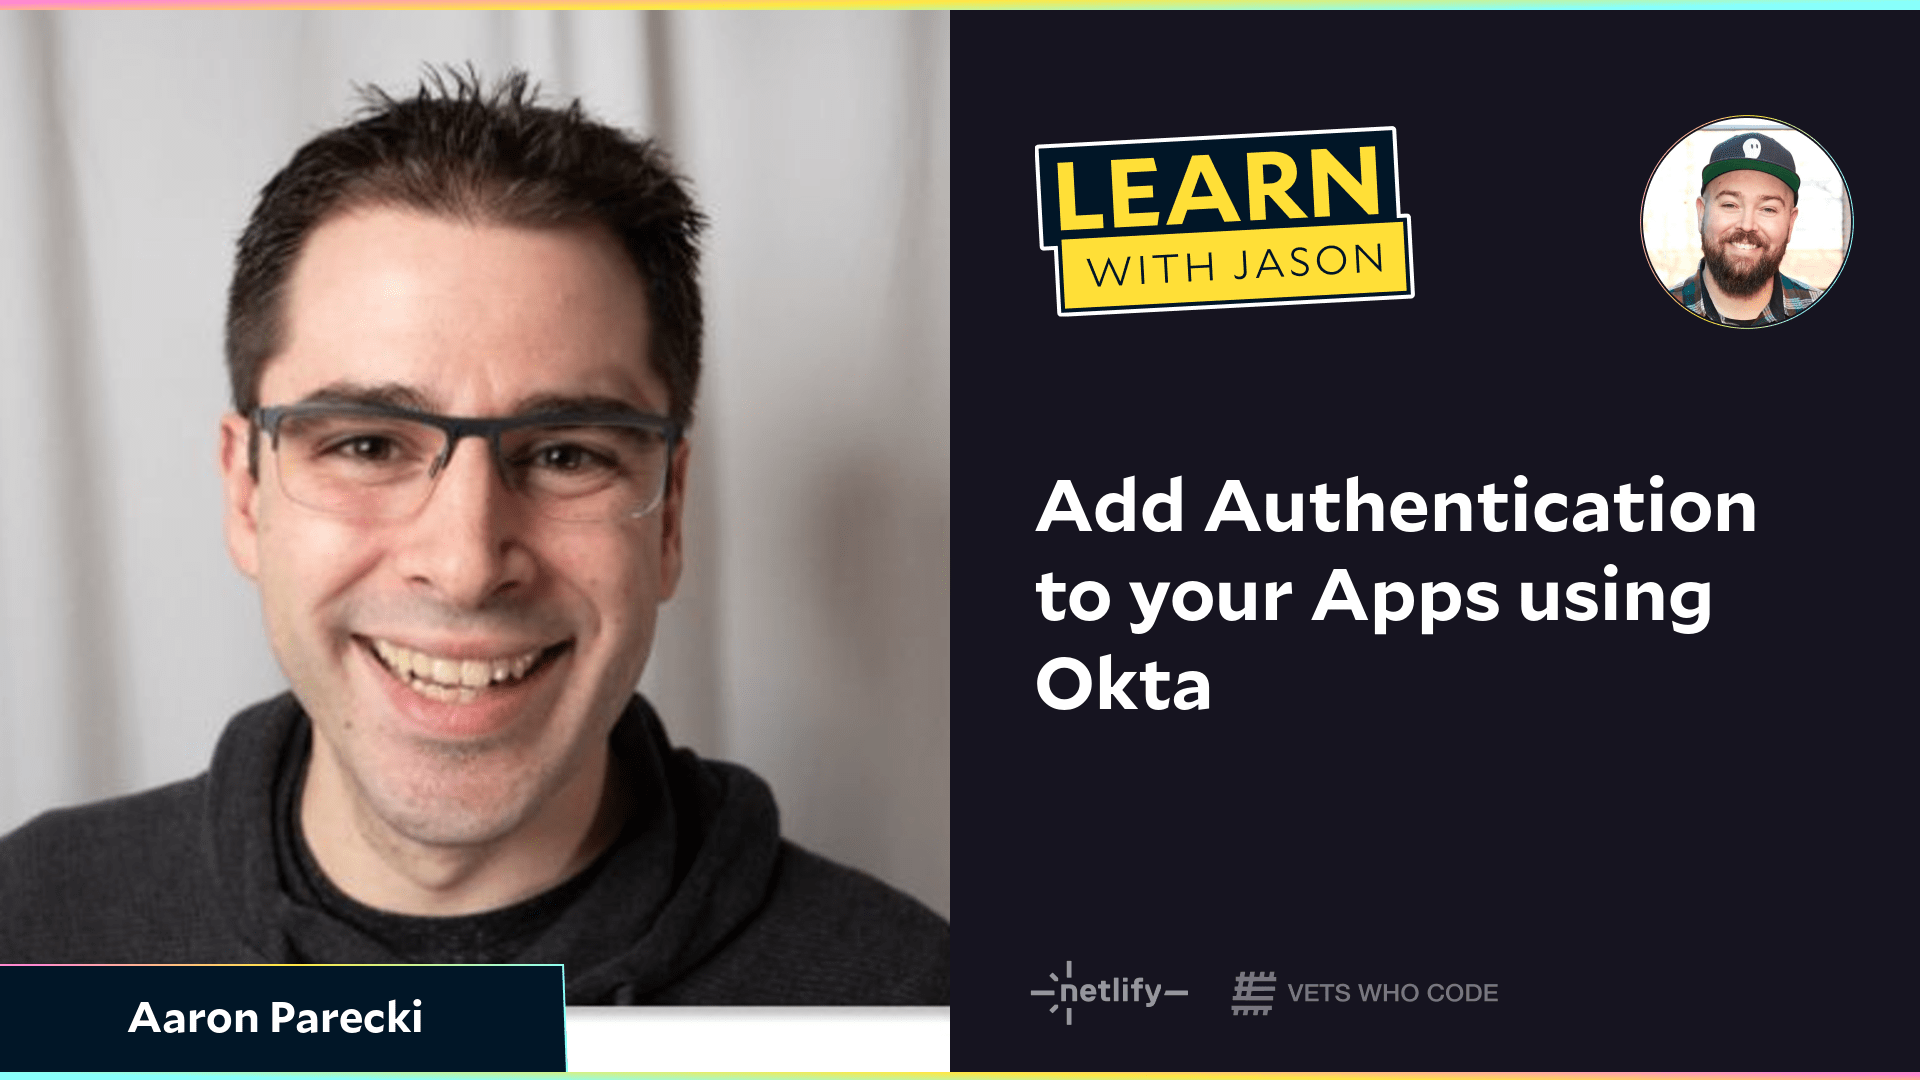 Add Authentication to your Apps using Okta (with Aaron Parecki)